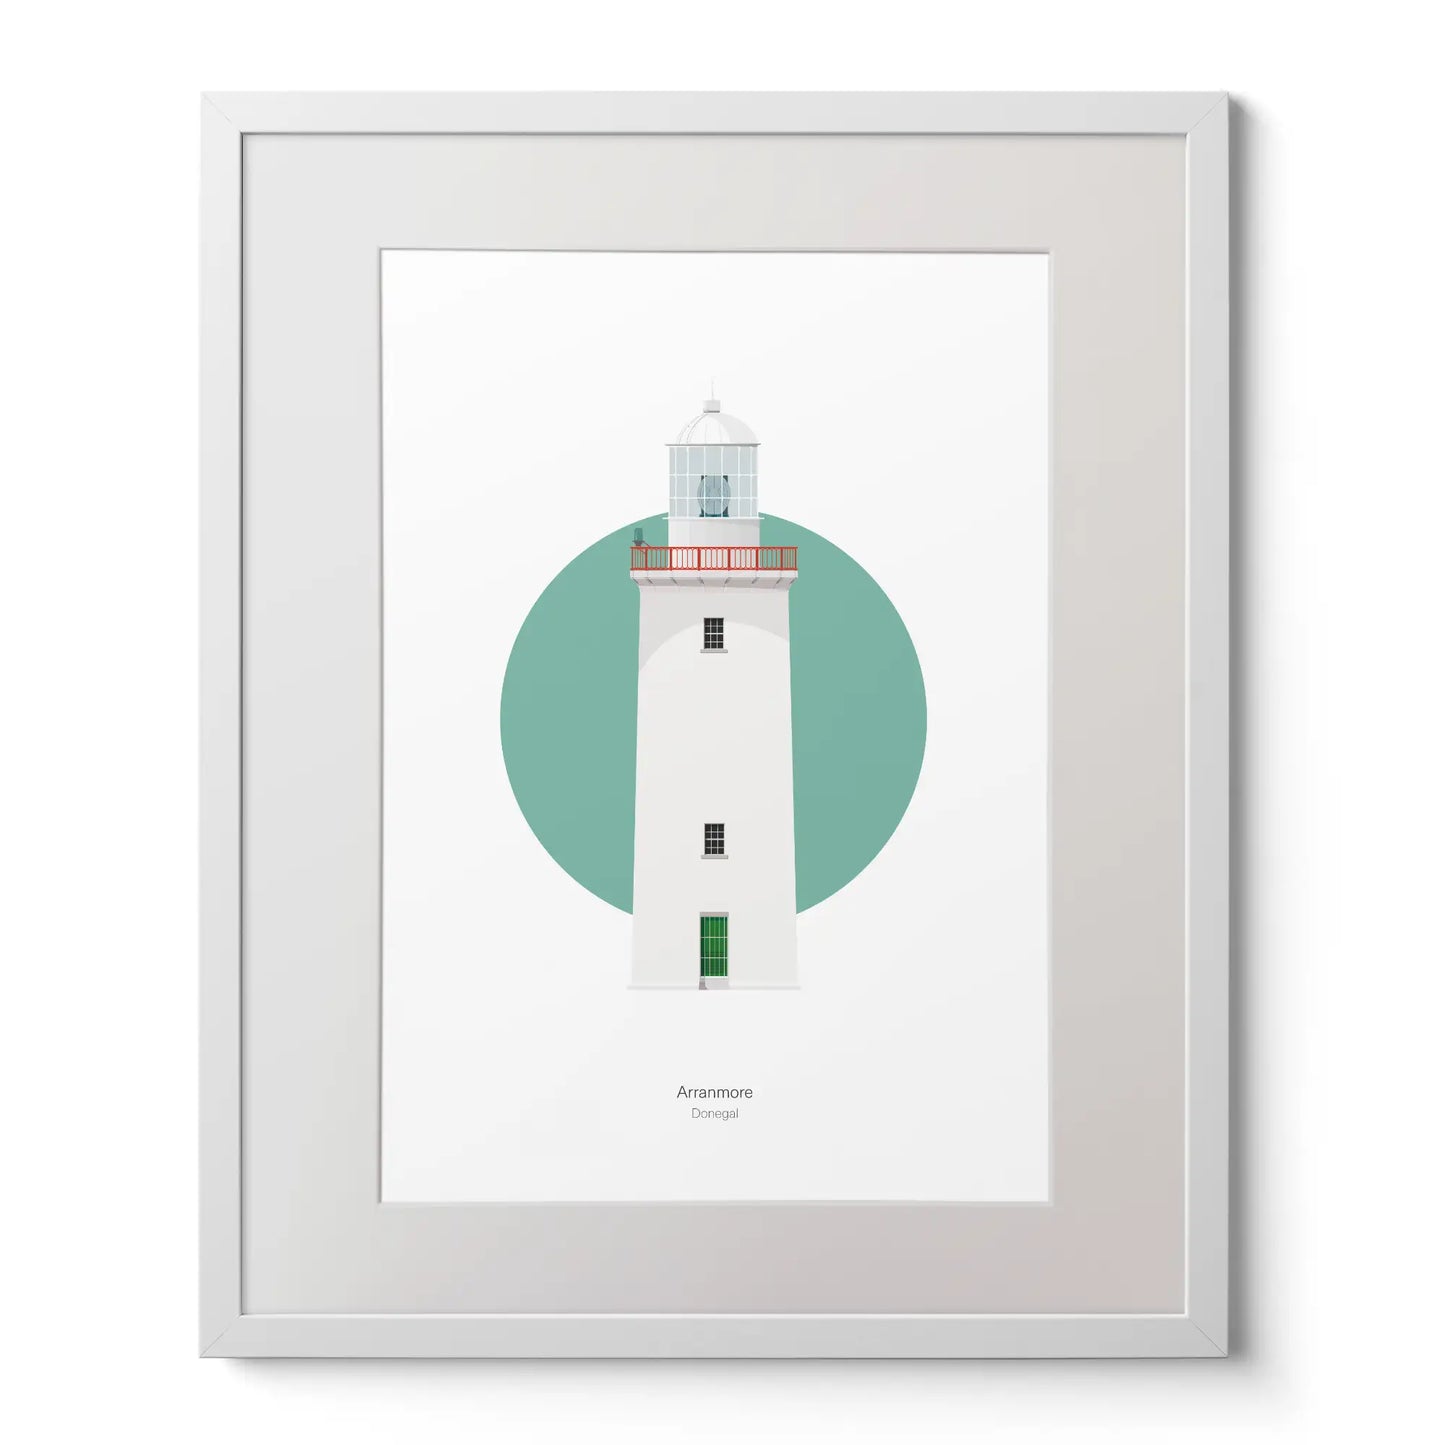 Illustration of Arranmore lighthouse on a white background inside light blue square,  in a white frame measuring 40x50cm.